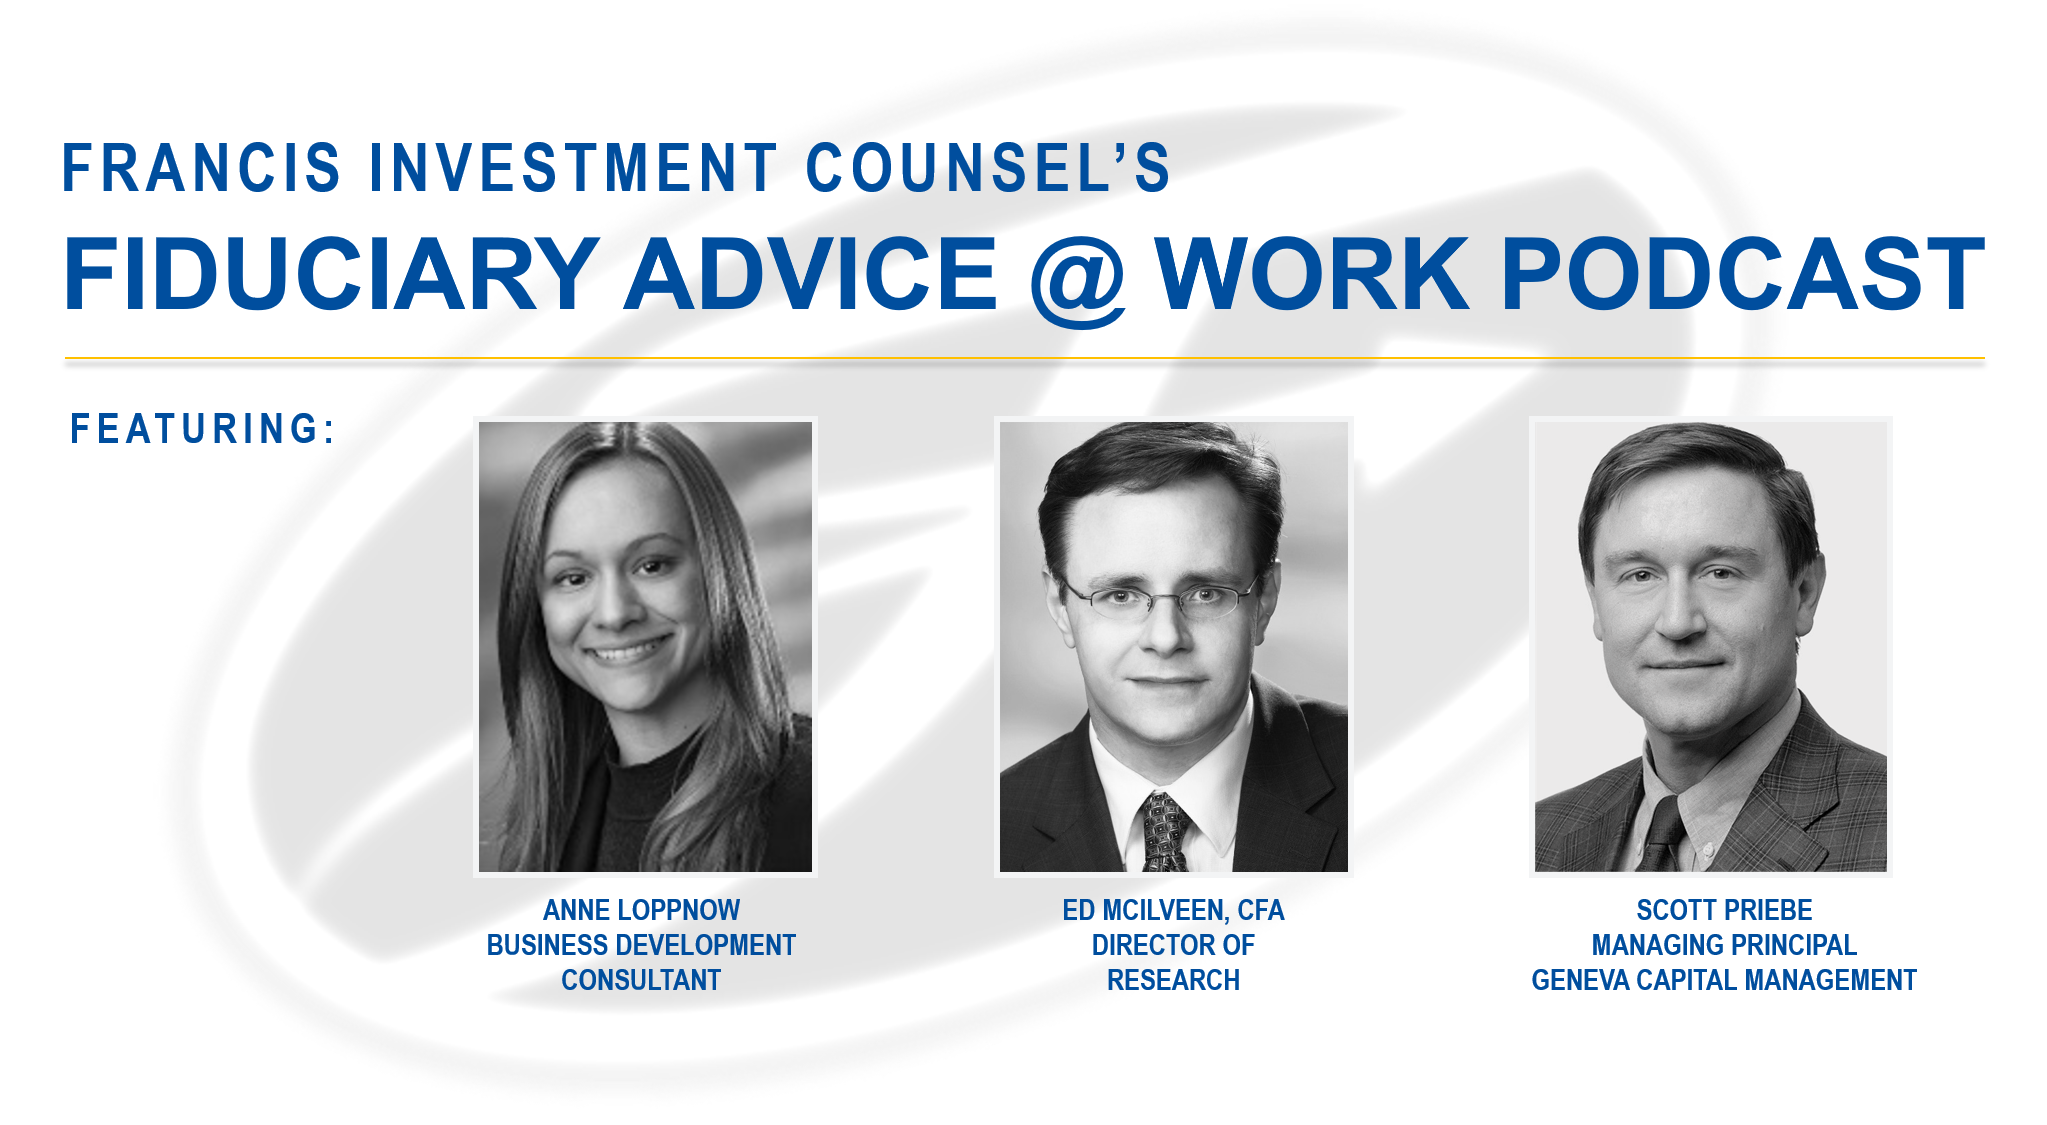 Francis Investment Counsel's Fiduciary Advice @ Work Podcast